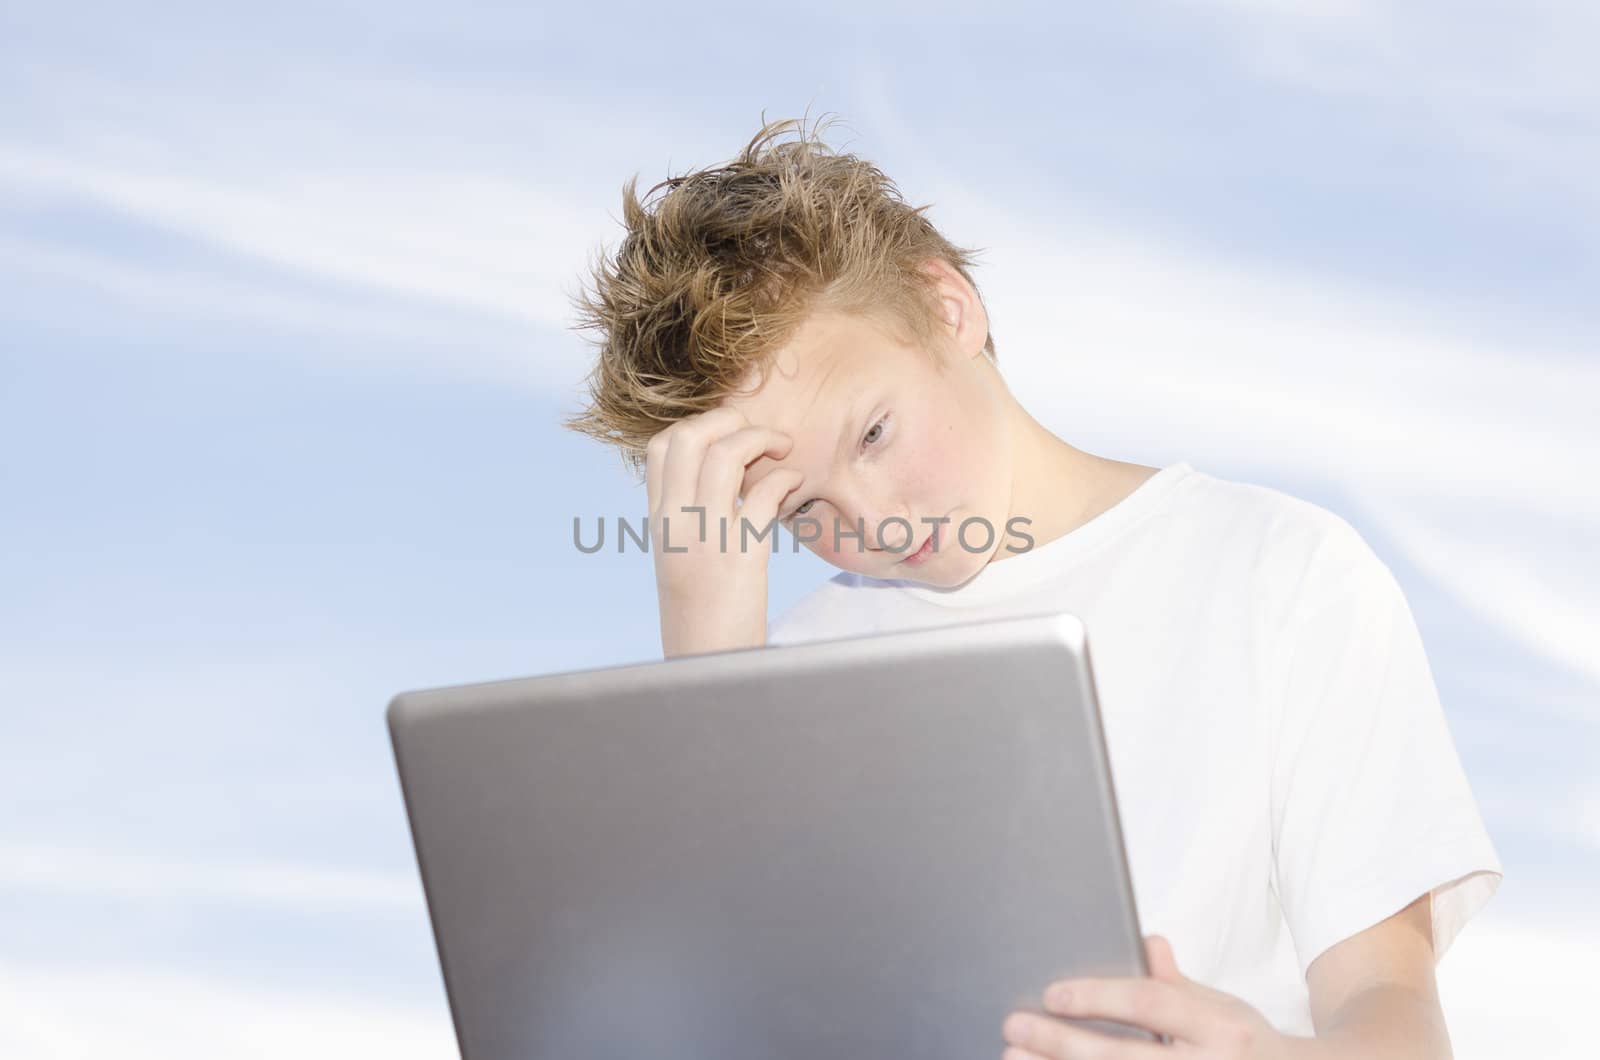 High key portrait of teenager with laptop against blue sky background